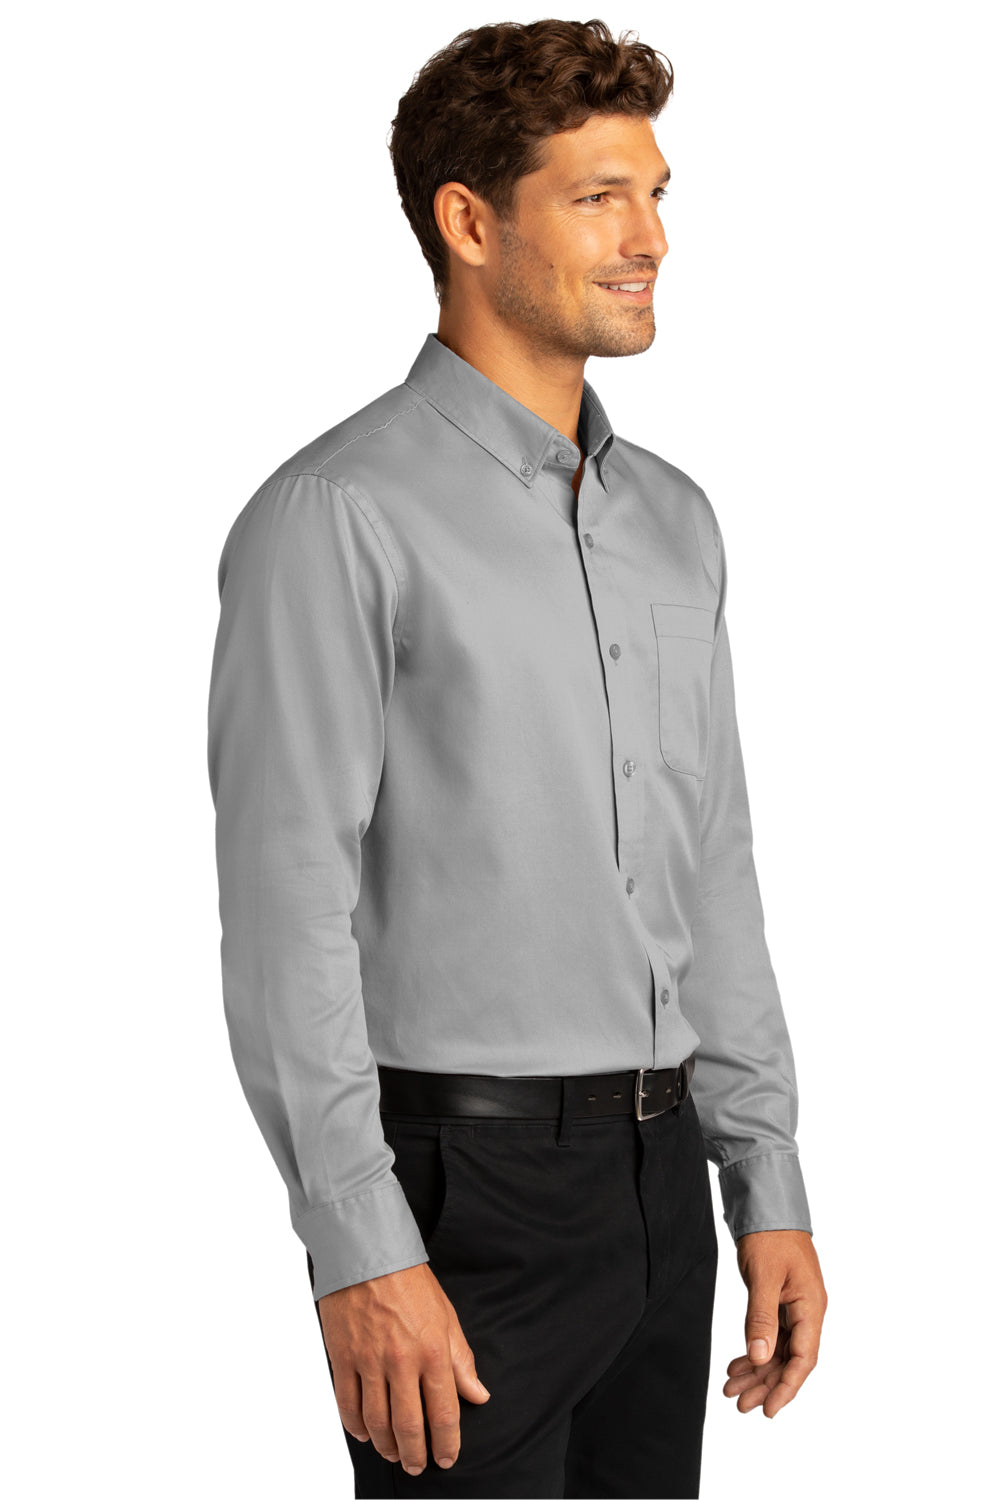 Port Authority W808 SuperPro Wrinkle Resistant React Long Sleeve Button Down Shirt w/ Pocket Gusty Grey 3Q